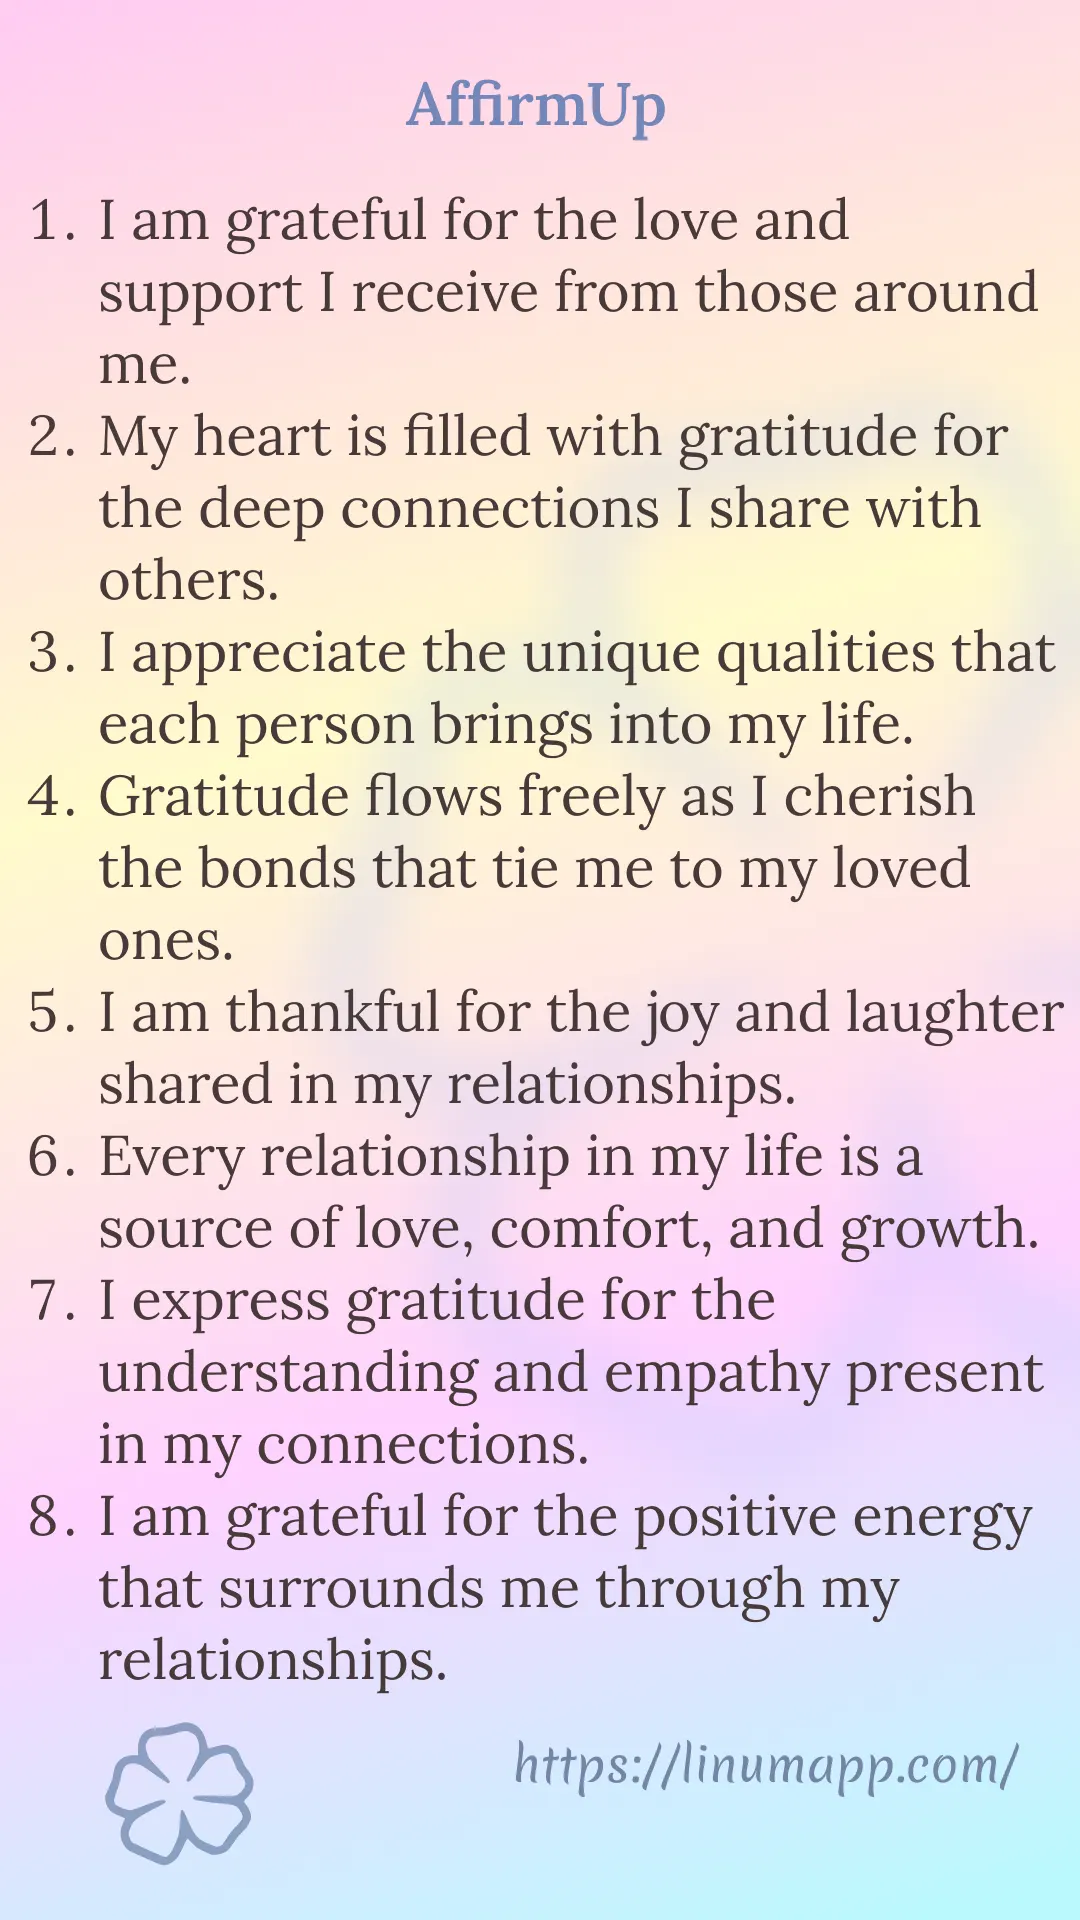 Gratitude Affirmations for Relationships and Connection